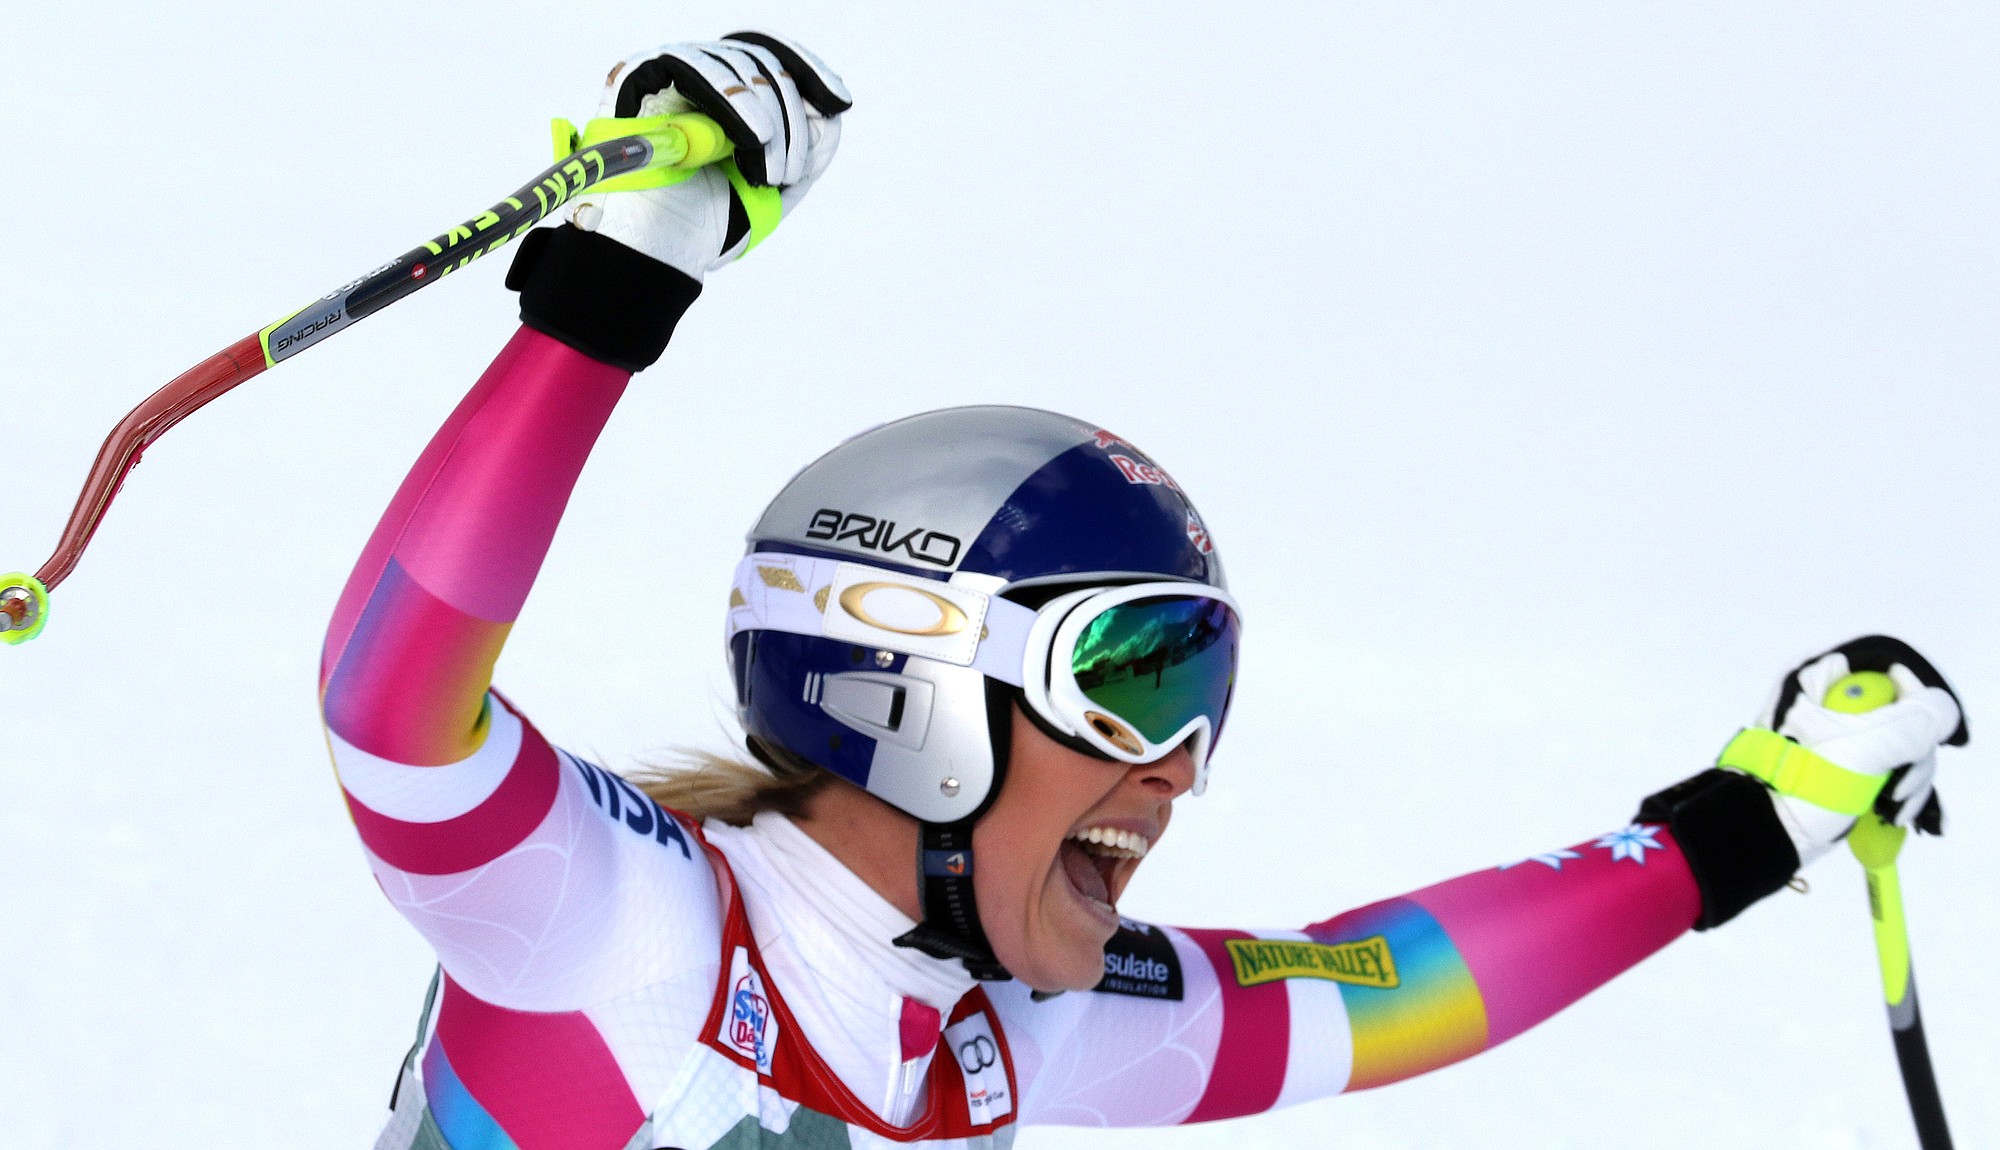 Lindsey Vonn celebrates in the finish area after winning the women's World Cup downhill in Cortina d'Ampezzo, Italy, Sunday, Jan. 18, 2015. Vonn's win matched Annemarie Moser-Proell's 35-year-old record of 62 World Cup wins, capping a comeback from two serious knee surgeries.